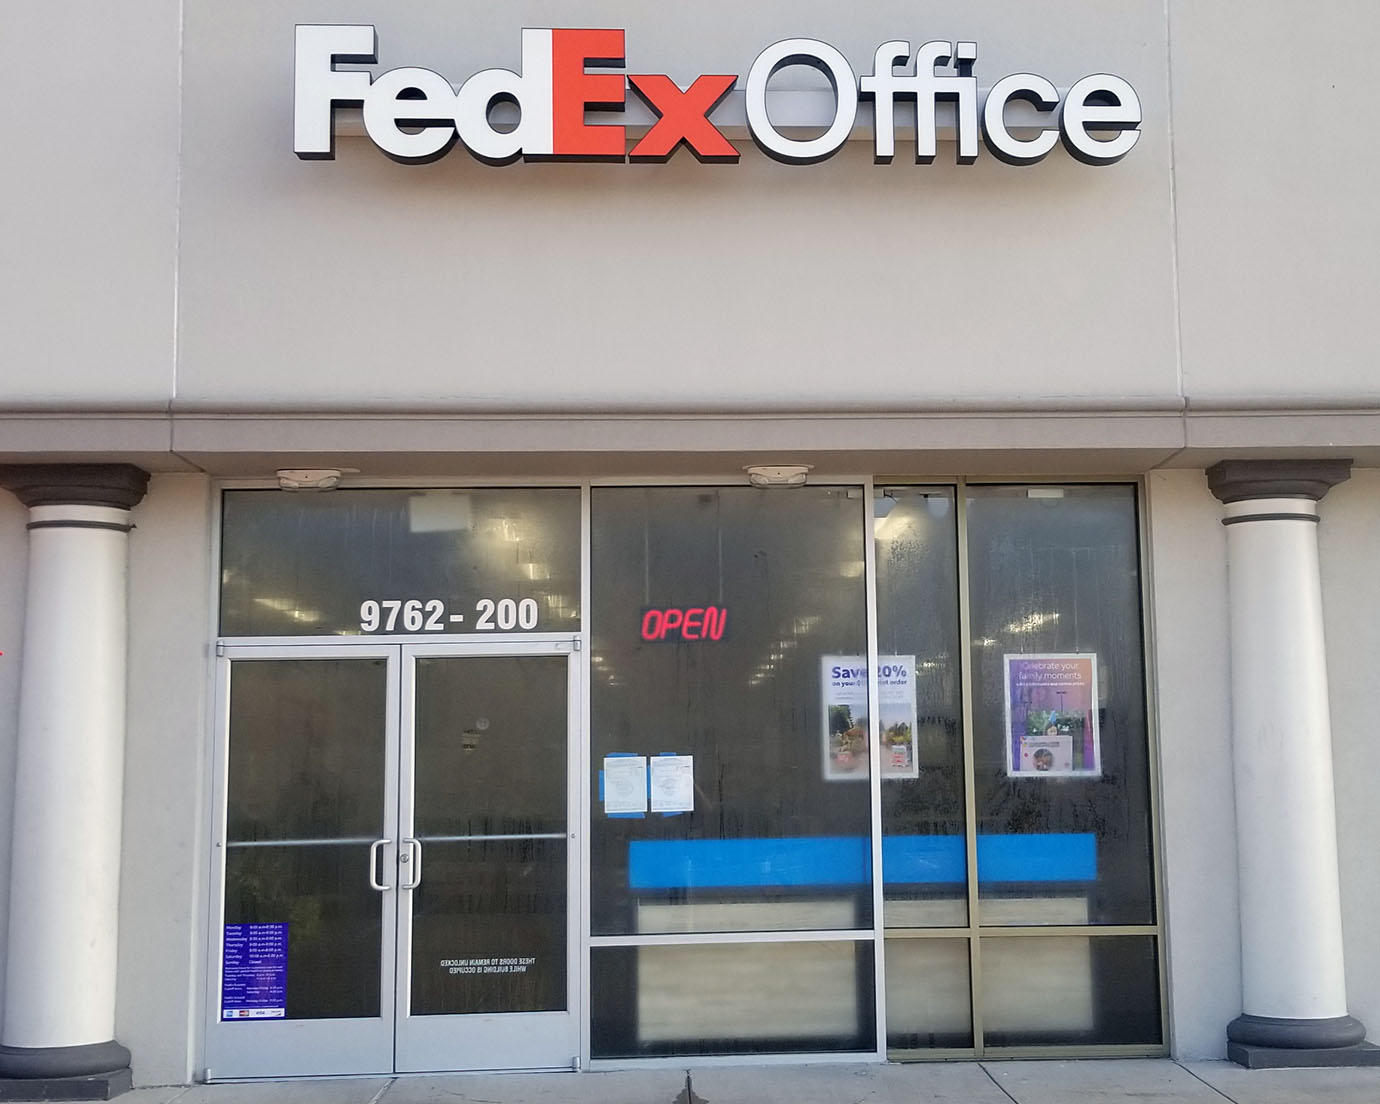 Exterior photo of FedEx Office location at 9762 Katy Fwy\t Print quickly and easily in the self-service area at the FedEx Office location 9762 Katy Fwy from email, USB, or the cloud\t FedEx Office Print & Go near 9762 Katy Fwy\t Shipping boxes and packing services available at FedEx Office 9762 Katy Fwy\t Get banners, signs, posters and prints at FedEx Office 9762 Katy Fwy\t Full service printing and packing at FedEx Office 9762 Katy Fwy\t Drop off FedEx packages near 9762 Katy Fwy\t FedEx shipping near 9762 Katy Fwy